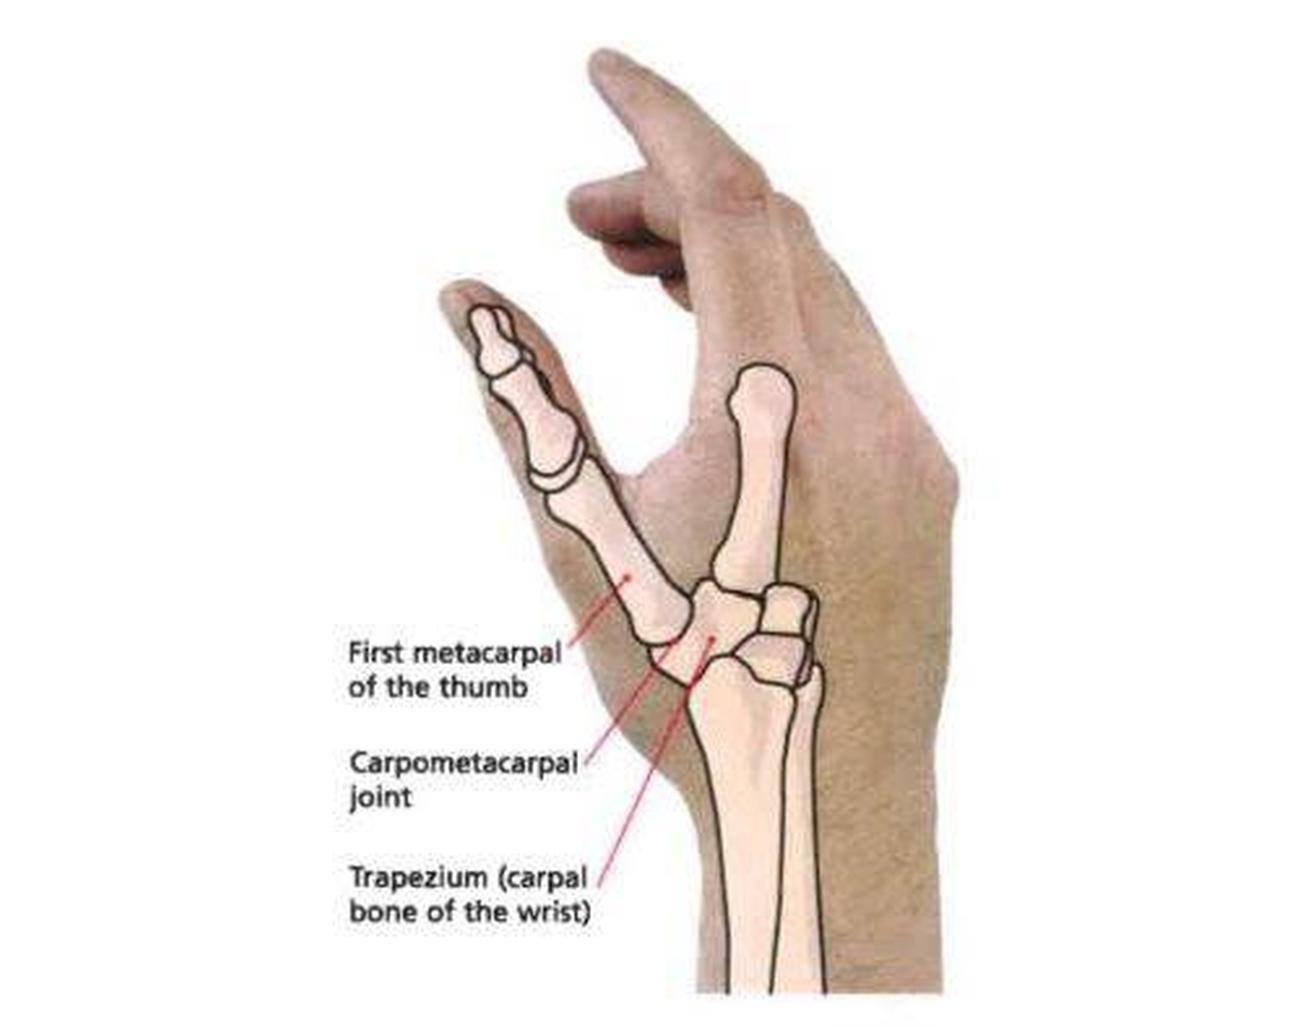 Pictures of Carpometacarpal Joint of the Thumb 1295. 